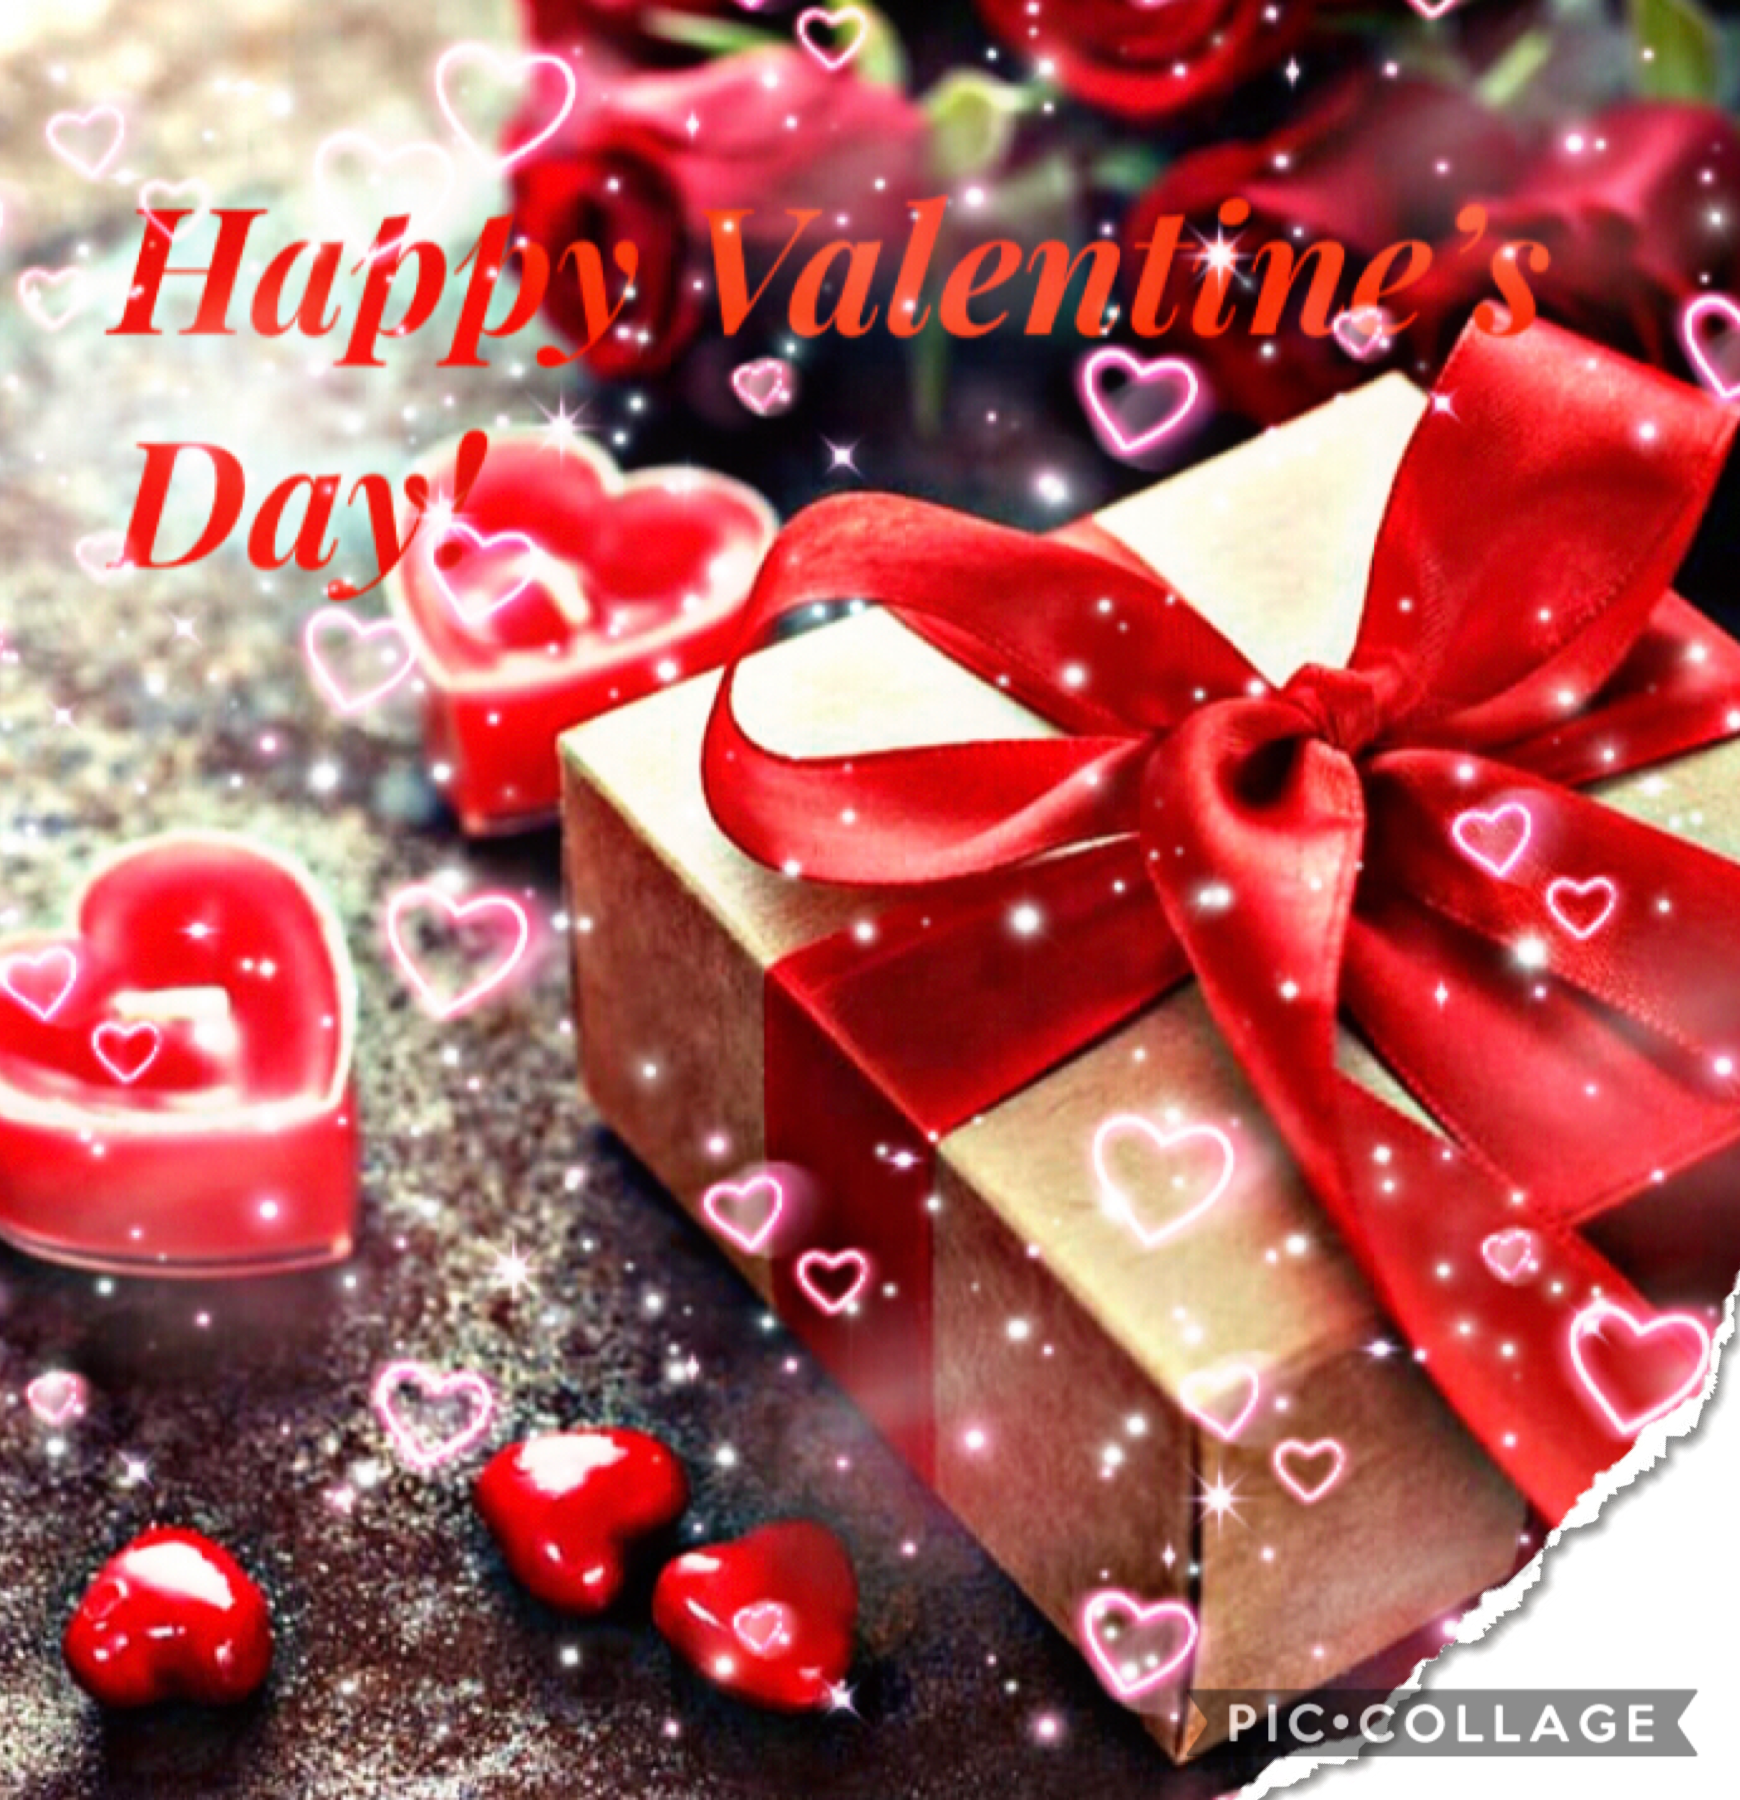 Happy Valentine’s Day to all my followers!